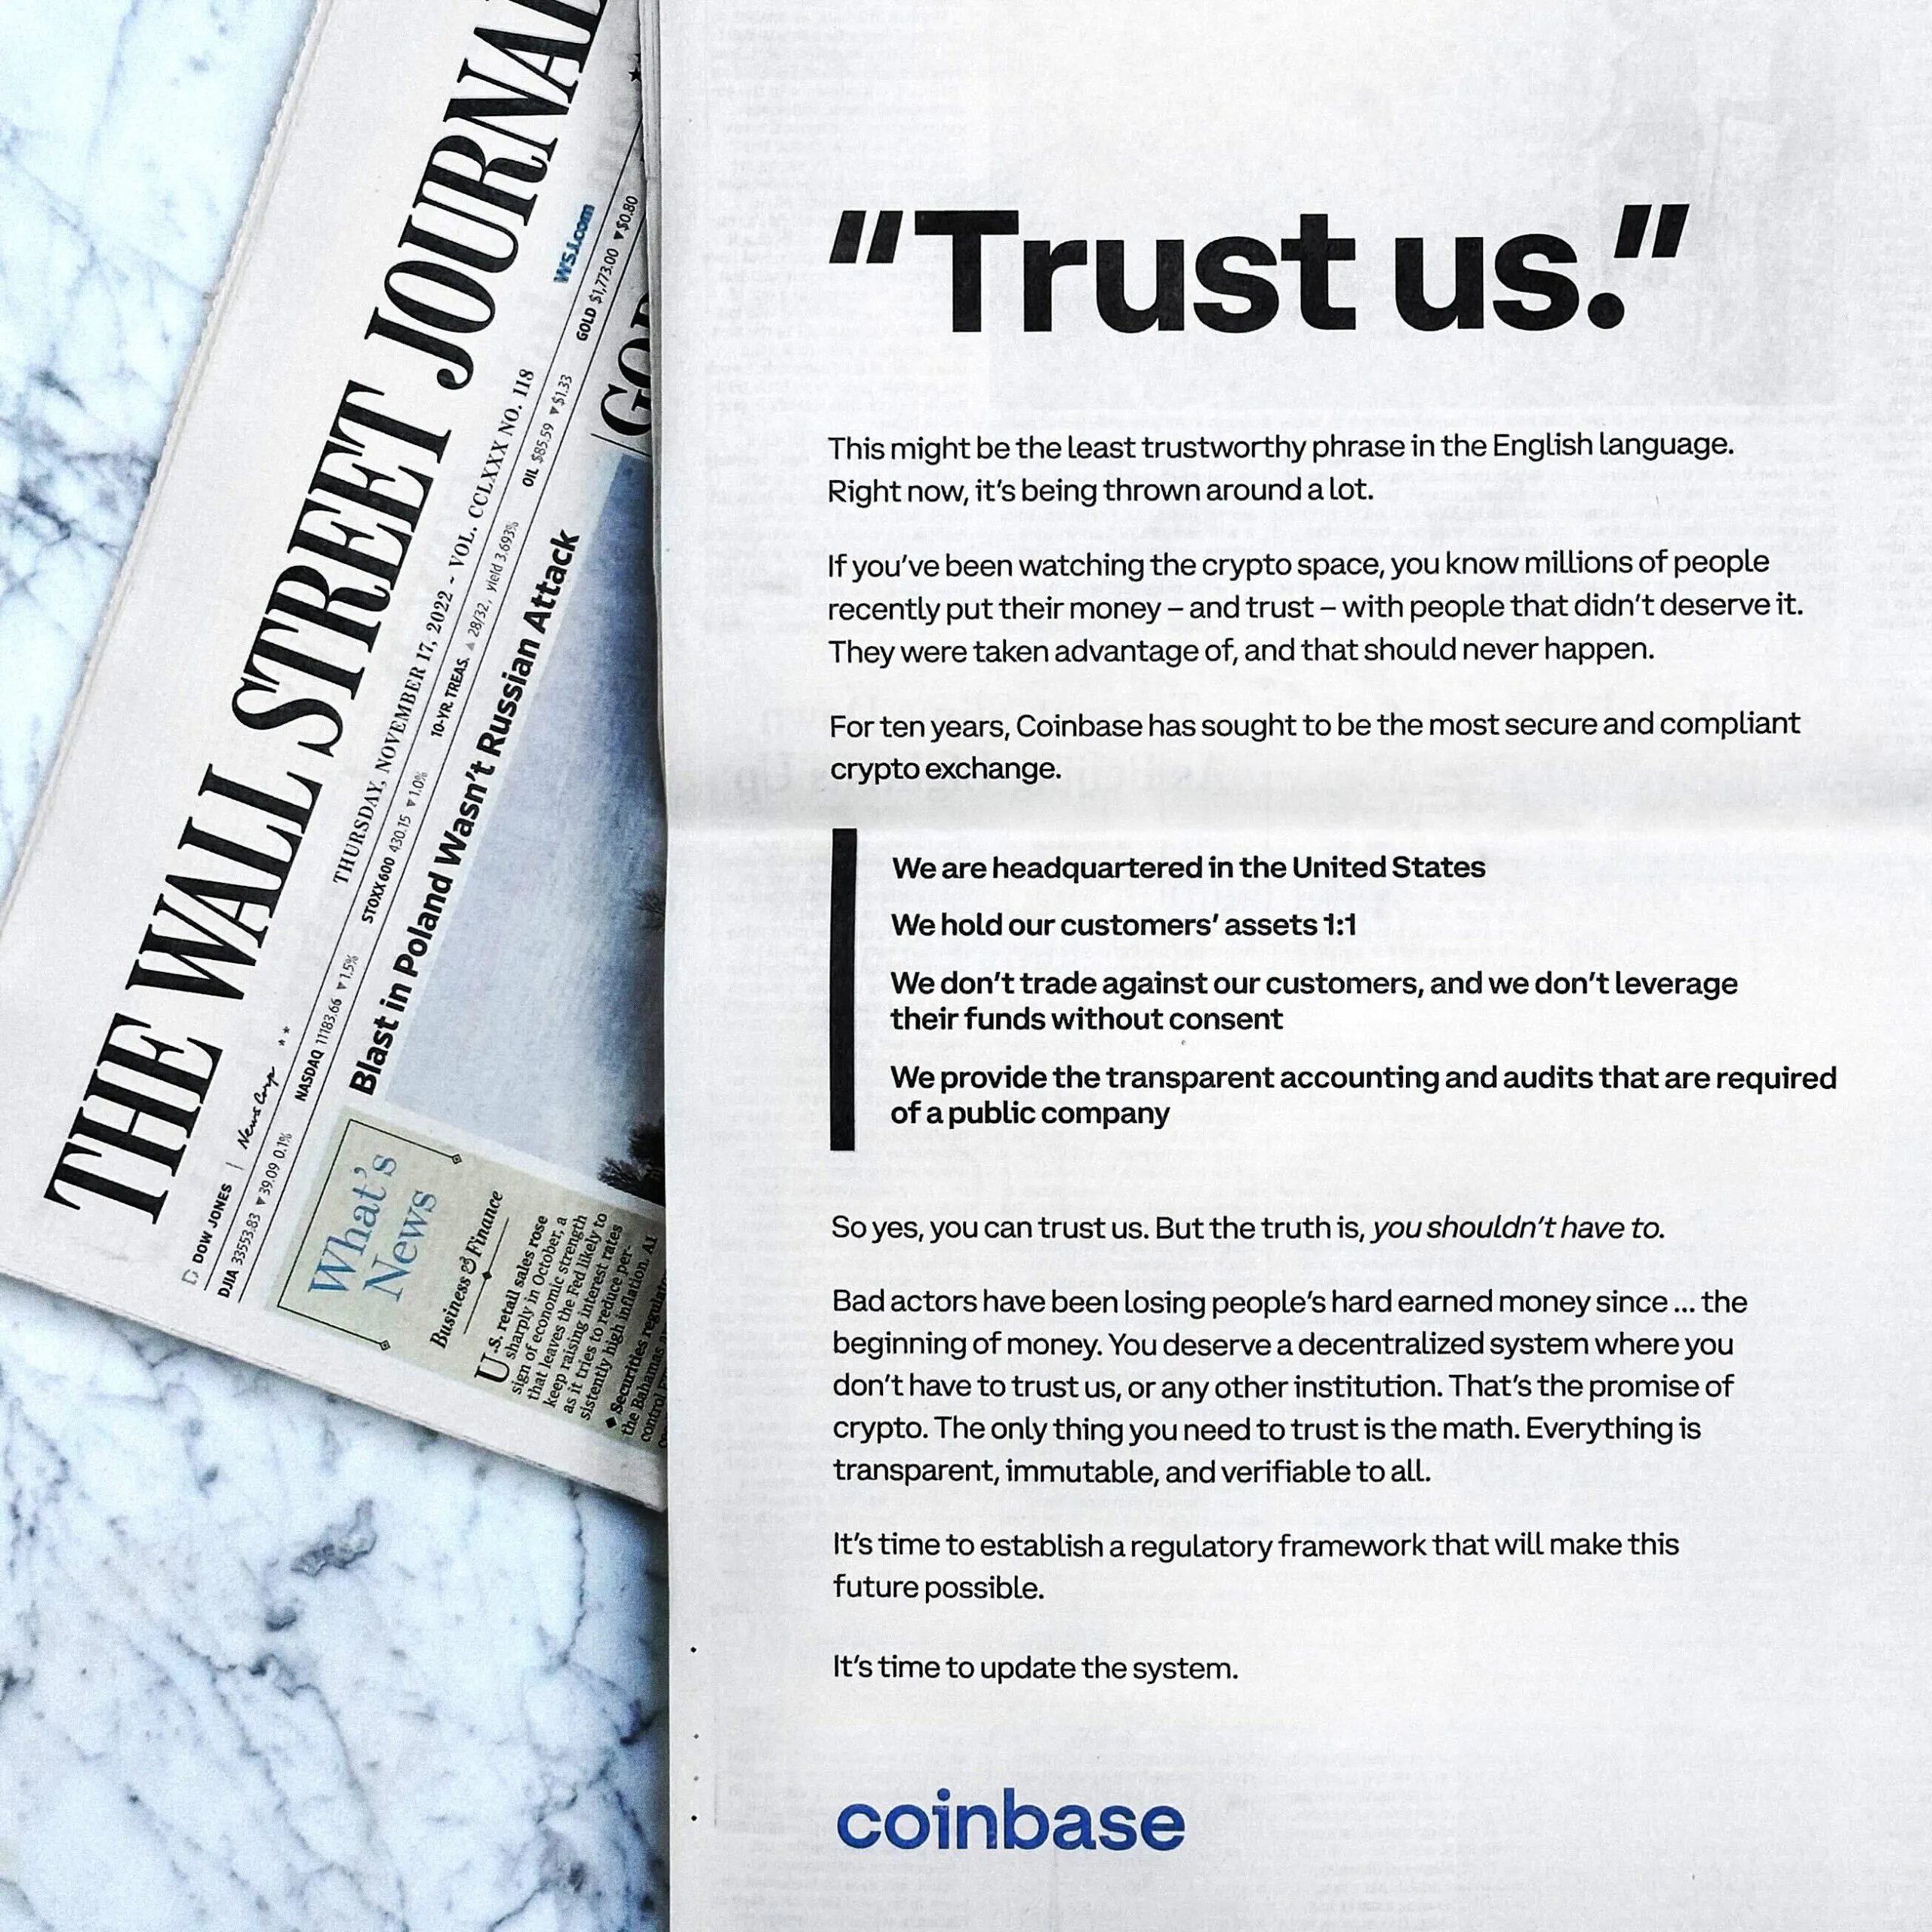 Coinbase "Trust us" ad on copy of Wall Street Journal